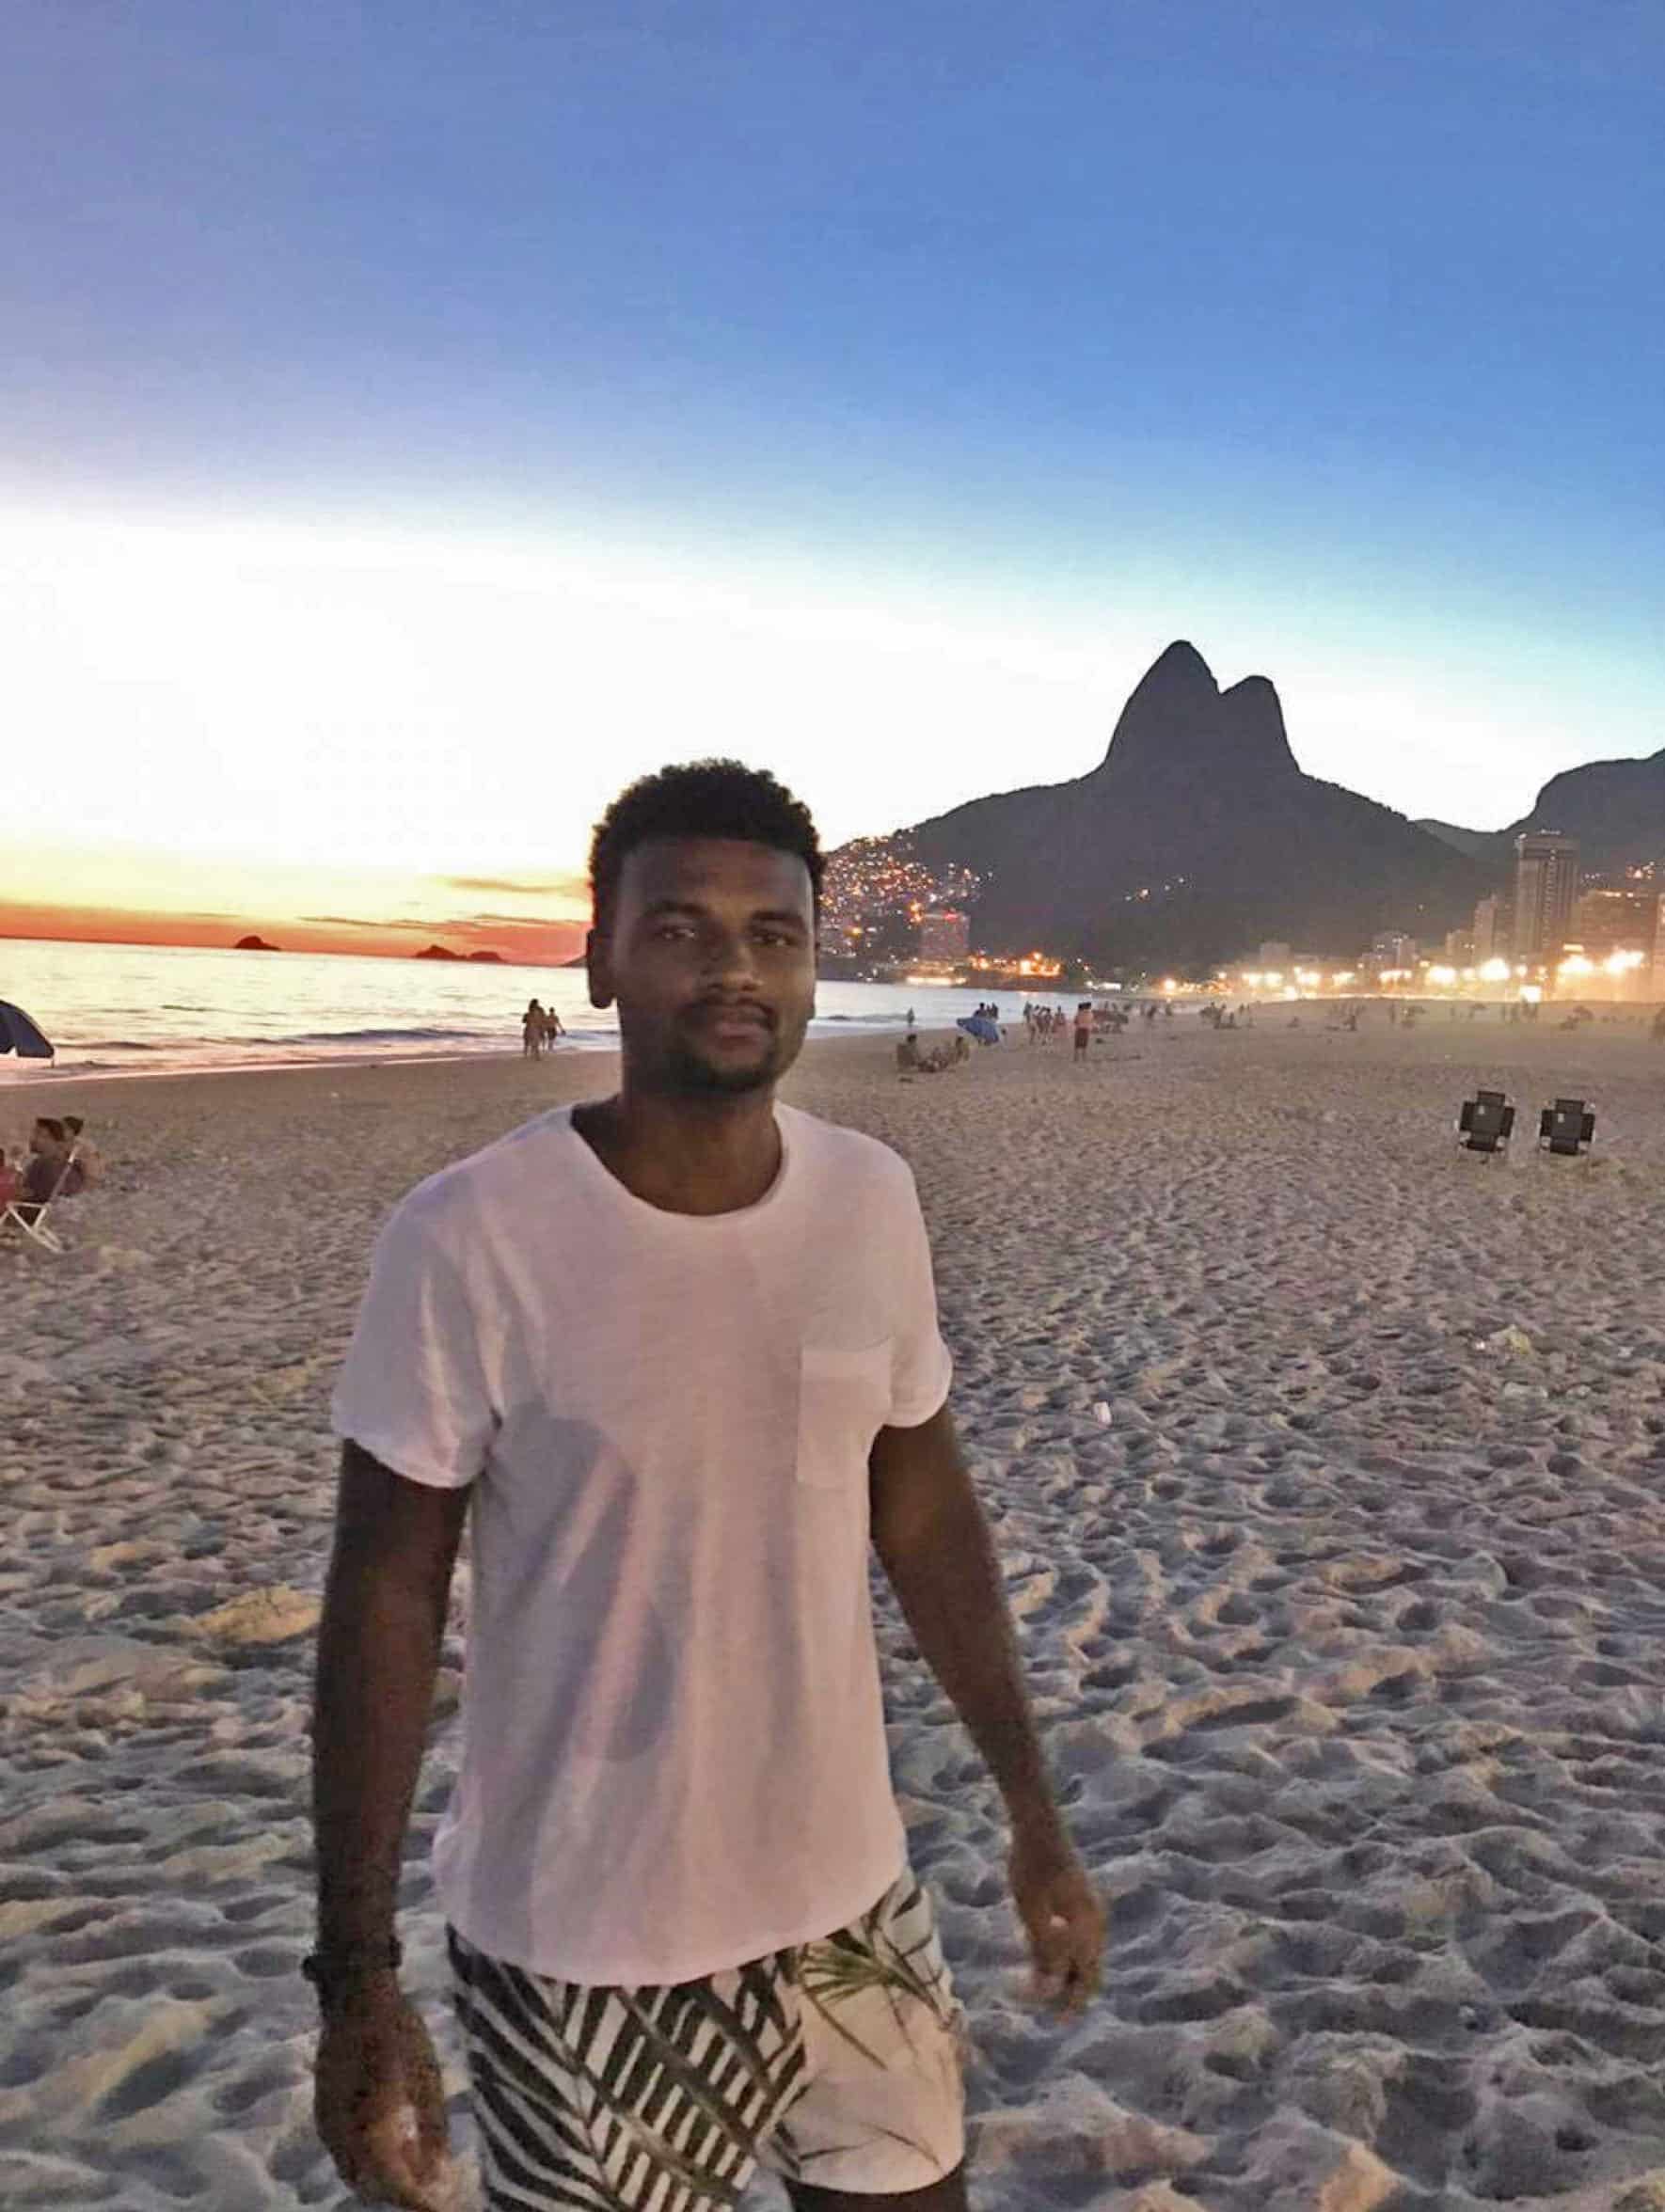 This picture shows Matheus at sunset on the beach in Rio de Janeiro. In the background there are the lights of the city.